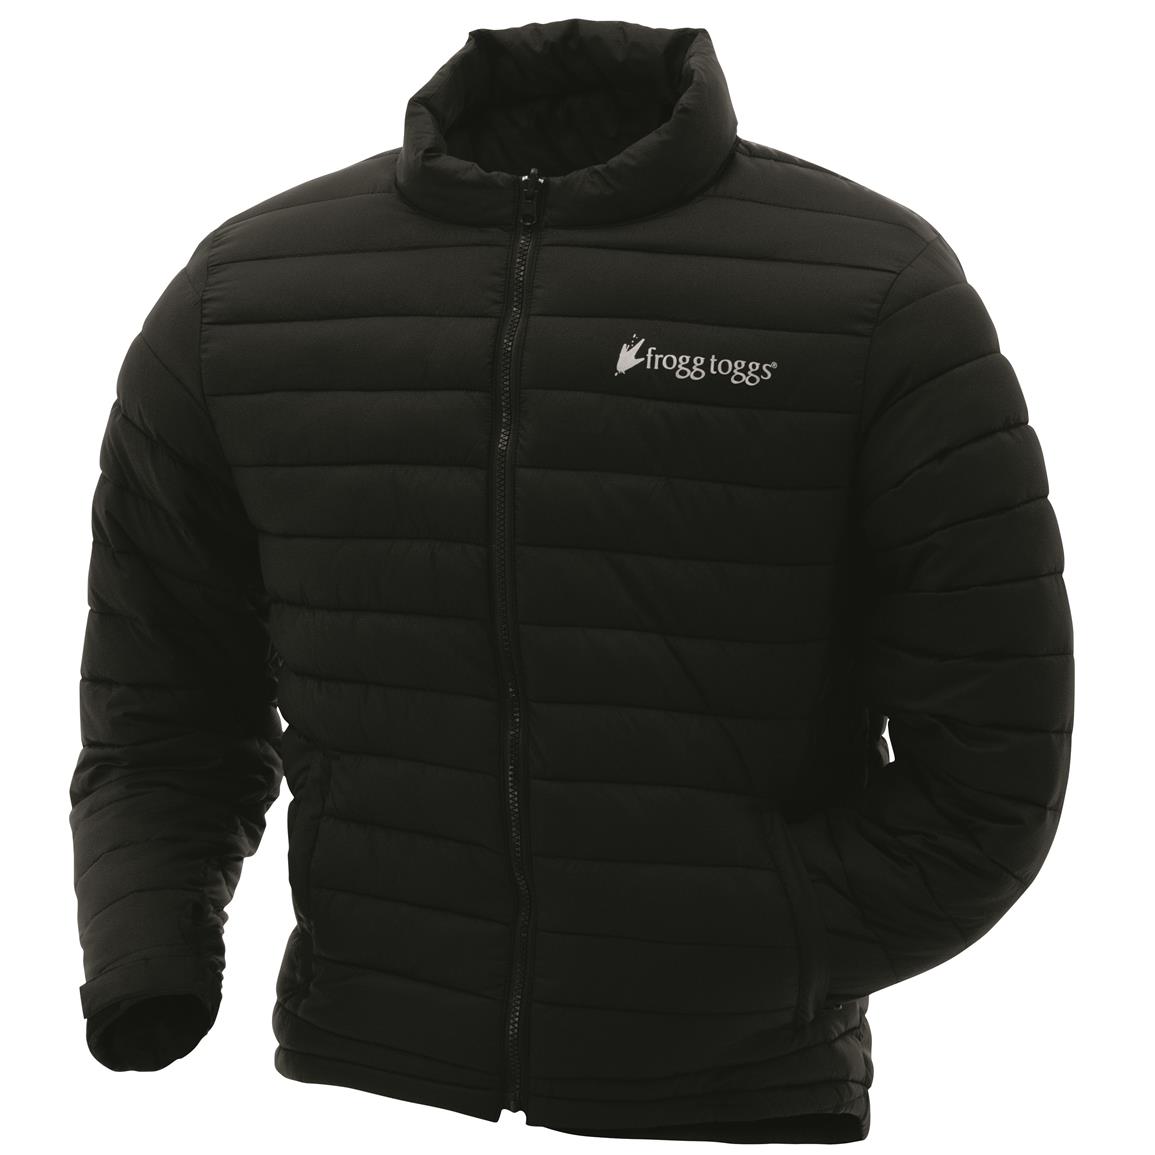 frogg toggs Men's Co-Pilot Insulated Puff Jacket, Black